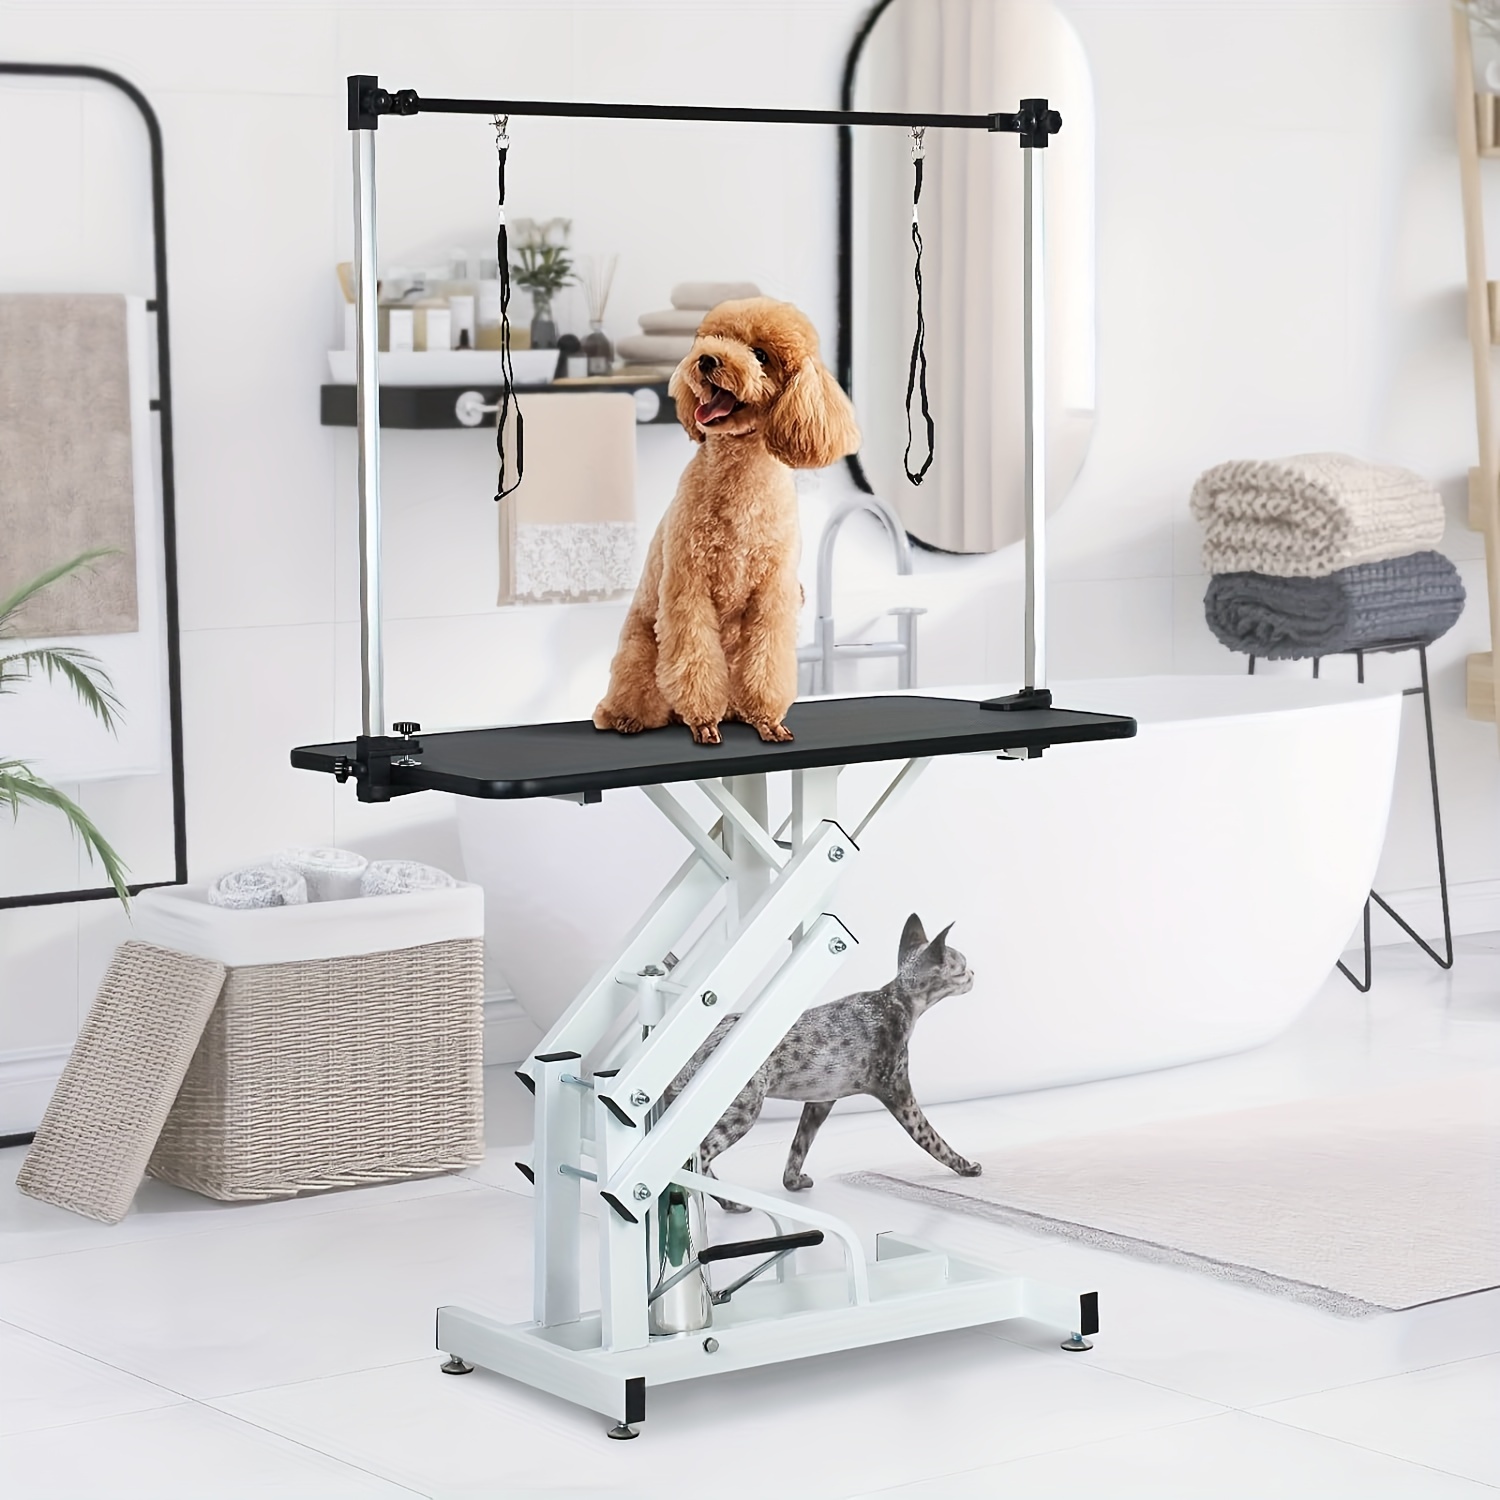 

Pet Dog Hydraulic Grooming Table Adjustable Height Trimming Drying Table With Arms, Noose For Small/medium/large Dogs, Cats, Maximum Capacity Up To 360lbs